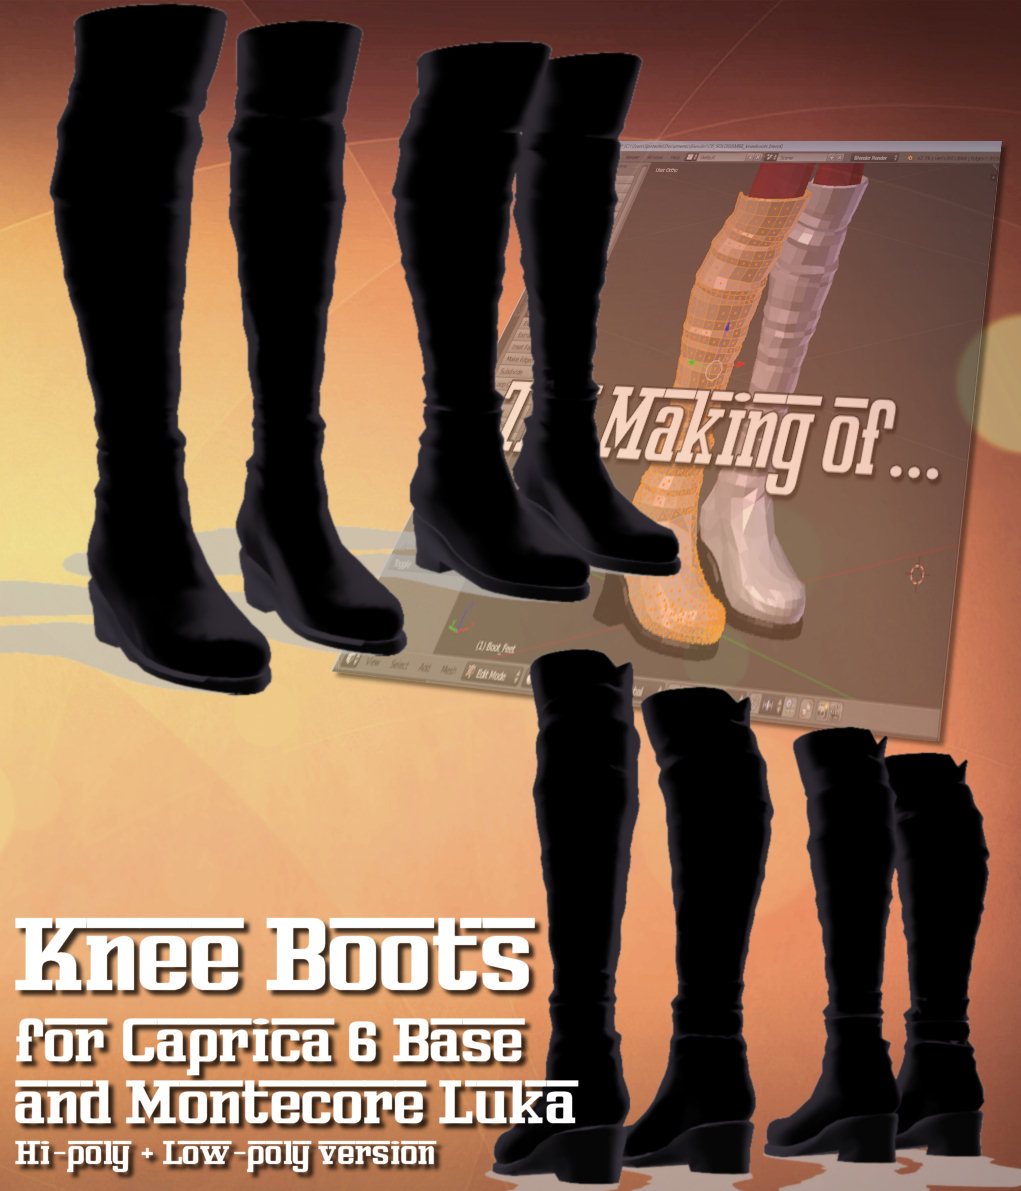 MMD PMX] Knee-high boots DL (Montecore + C6) by Riveda1972 on DeviantArt